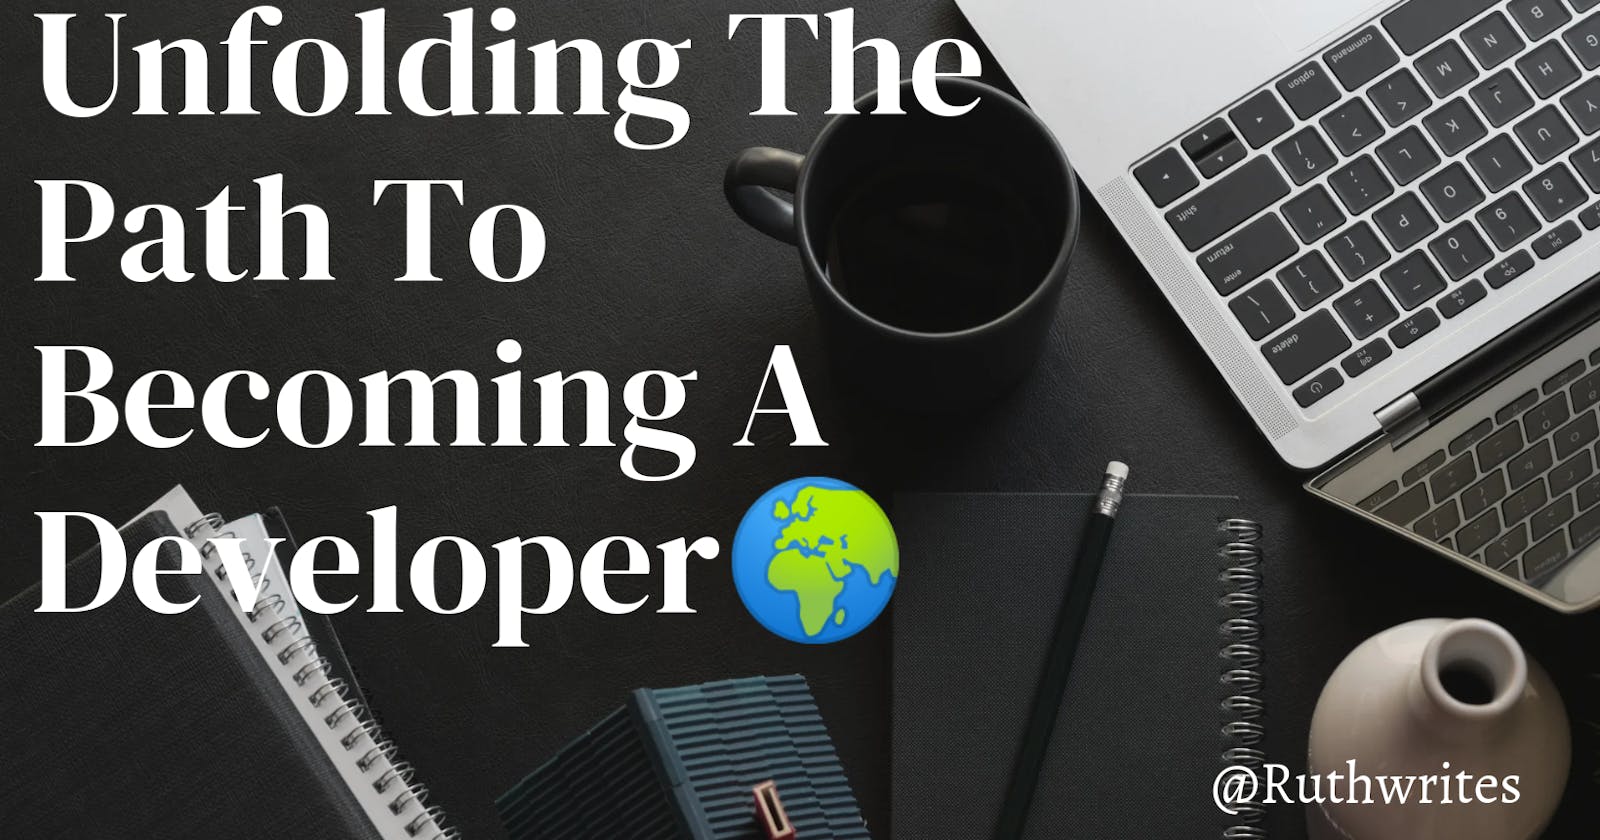 Unfolding The Path To Becoming A Developer